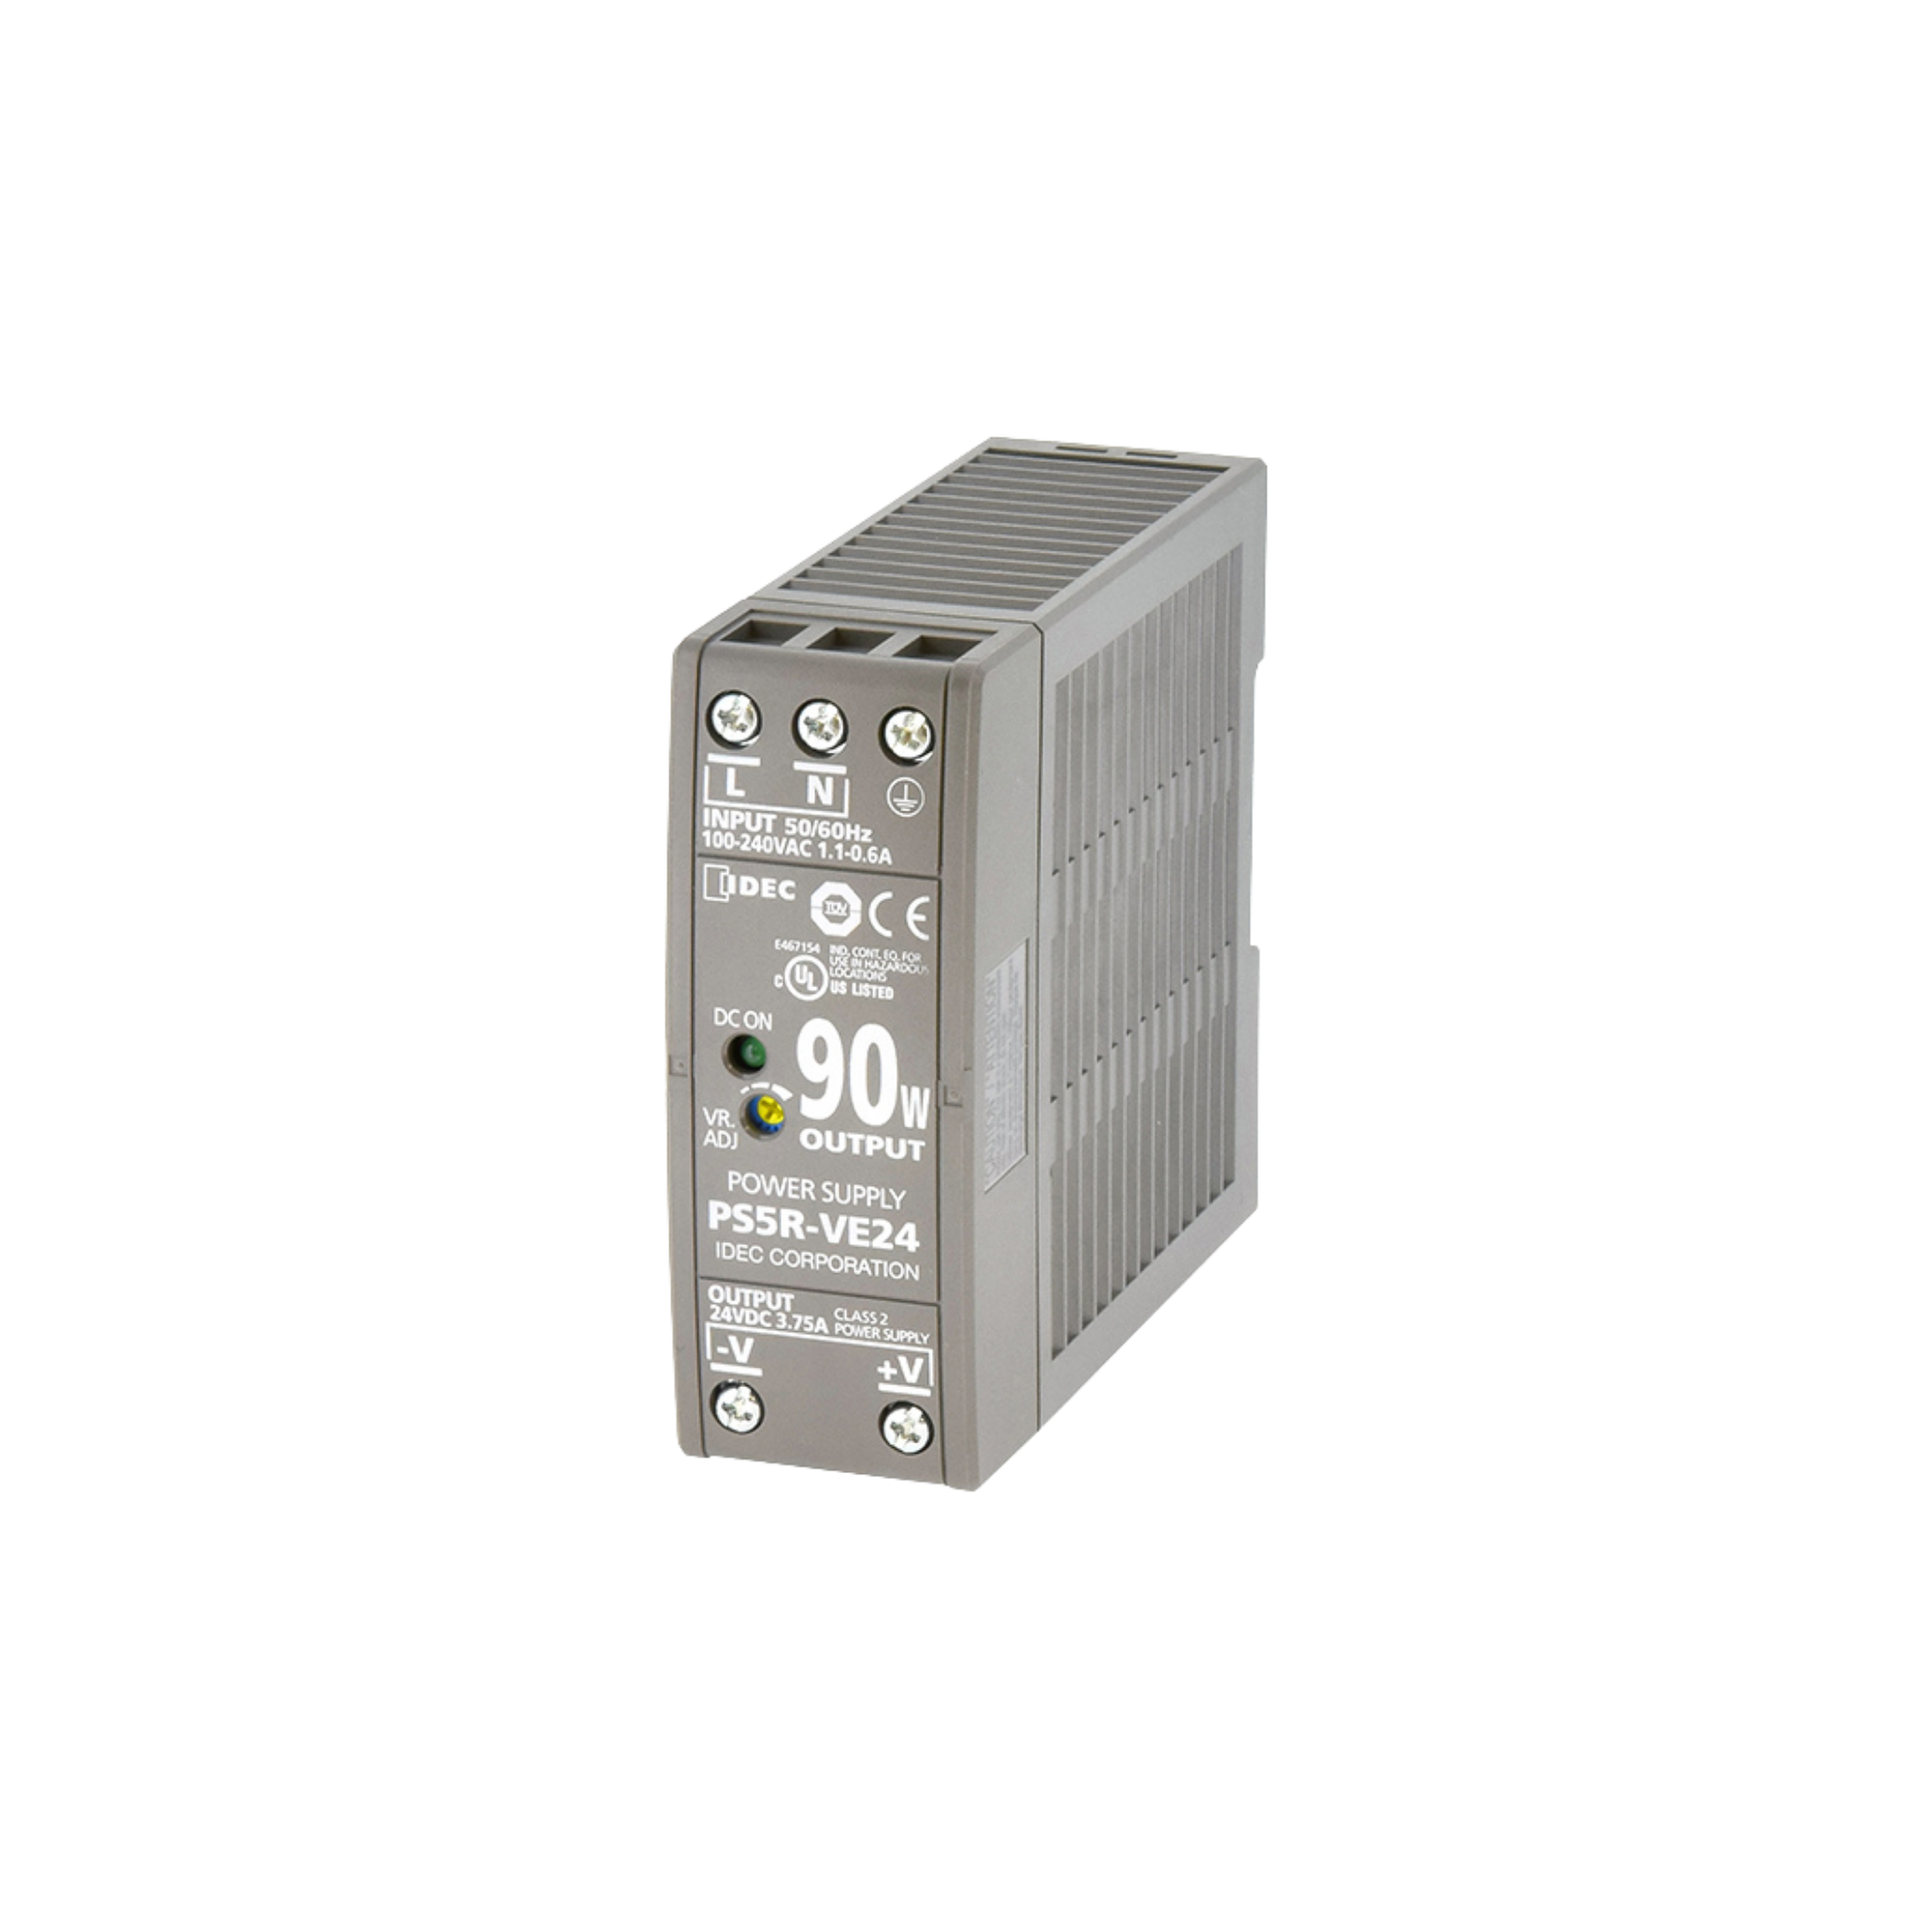 grey rectangular power supply box with terminal points in the front